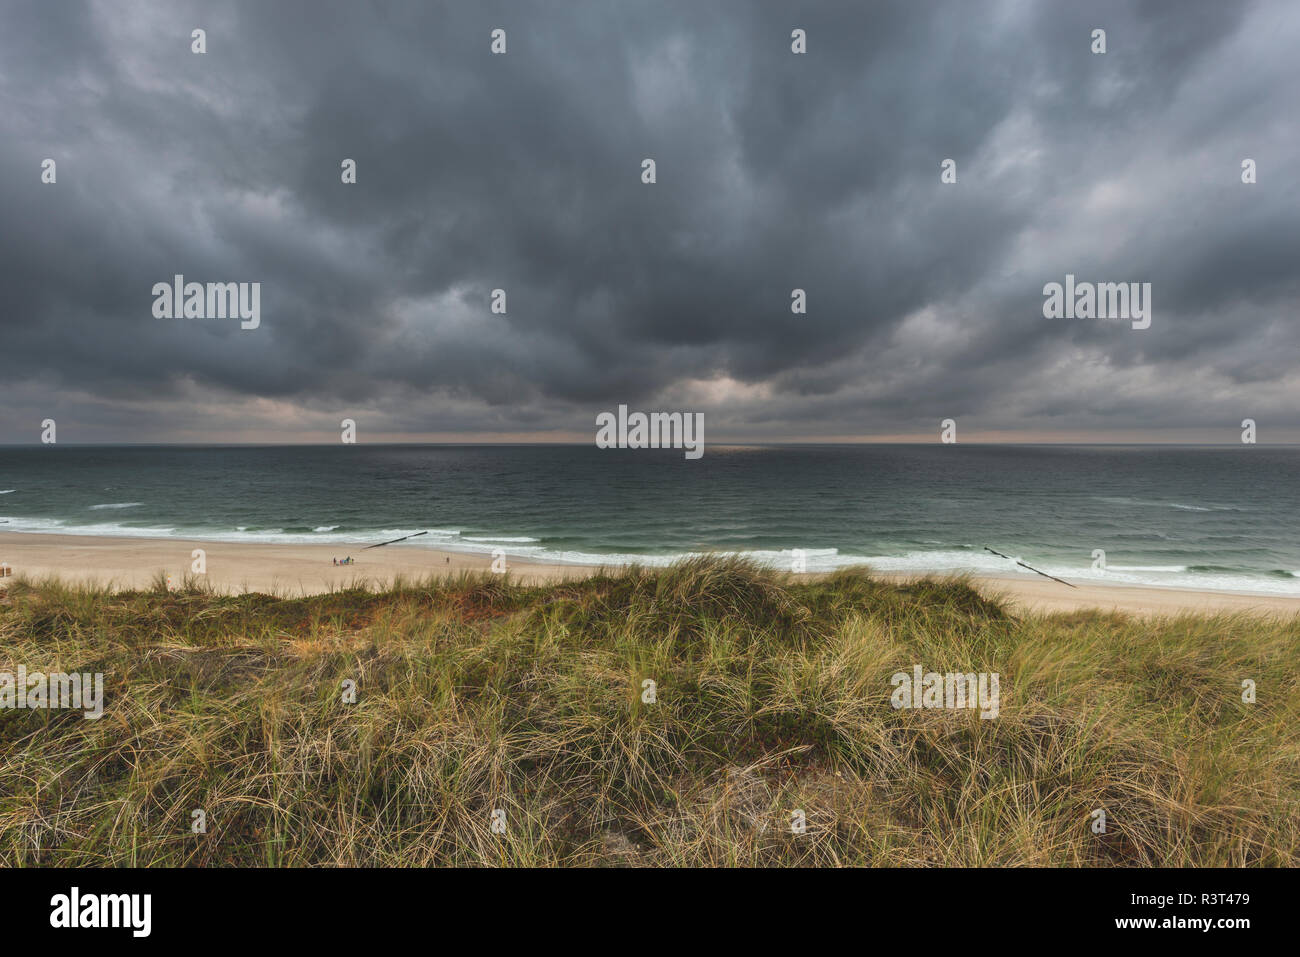 Germany, Schleswig-Holstein, Sylt, Wenningstedt, rain clouds over the beach Stock Photo